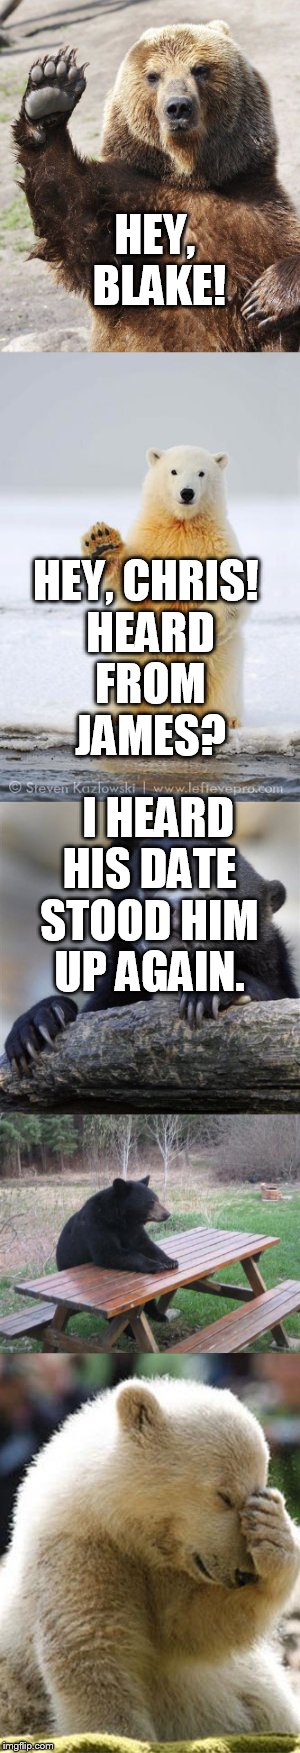 Conversation  | HEY, BLAKE! HEY, CHRIS! HEARD FROM JAMES? I HEARD HIS DATE STOOD HIM UP AGAIN. | image tagged in hello bear,confession bear,bad luck bear,facepalm bear | made w/ Imgflip meme maker